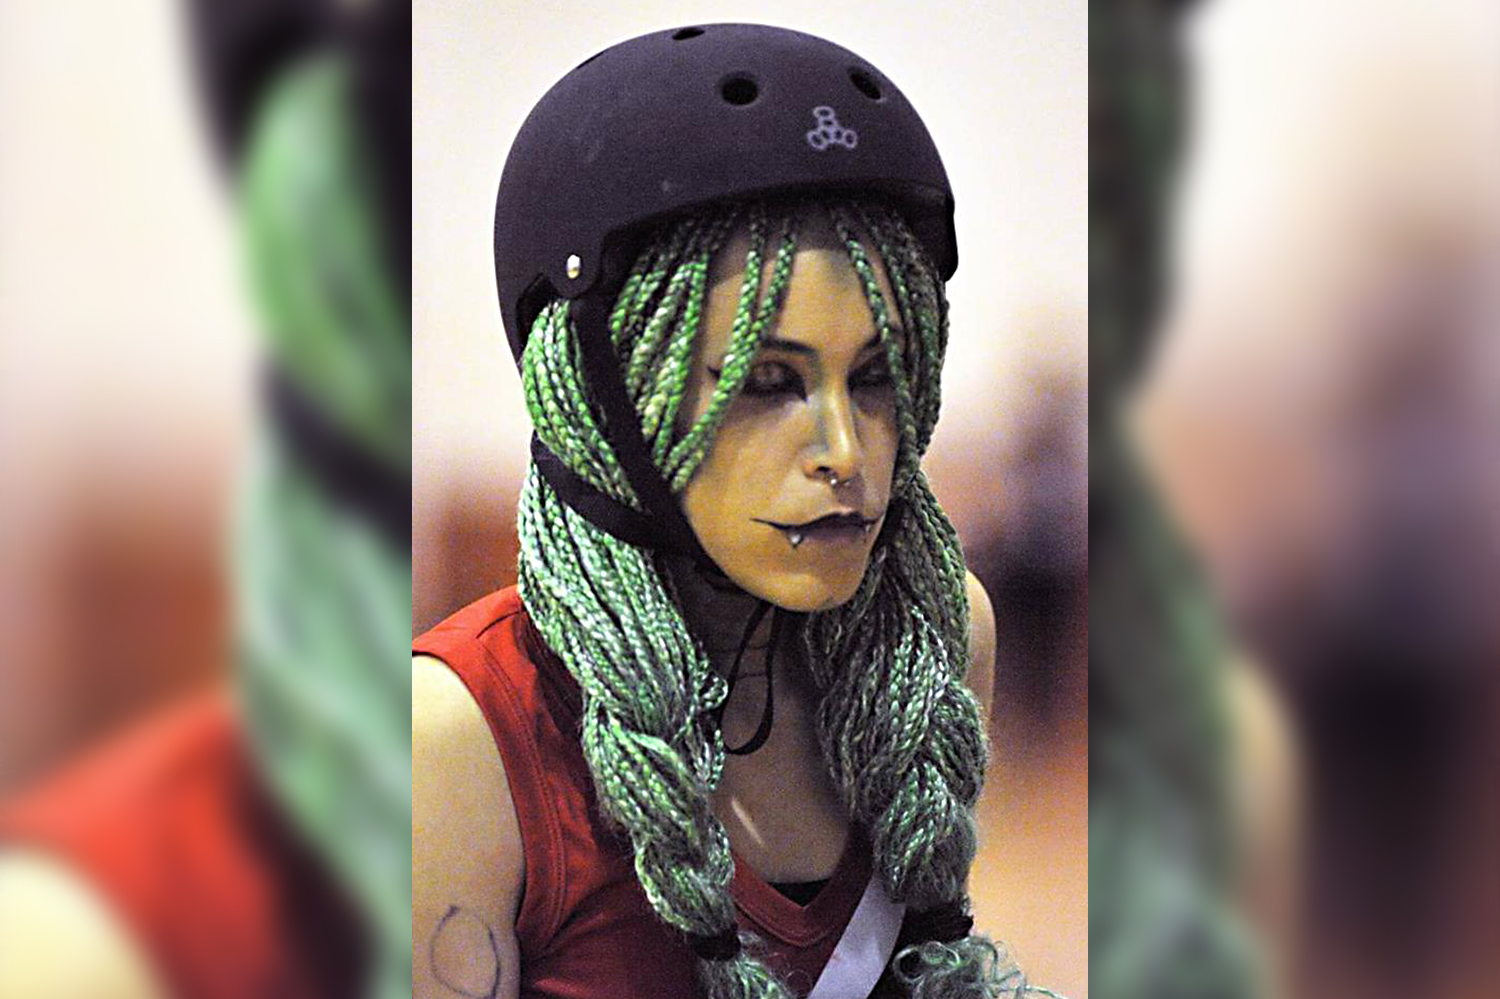 Roller derby makeup: beautiful & scary